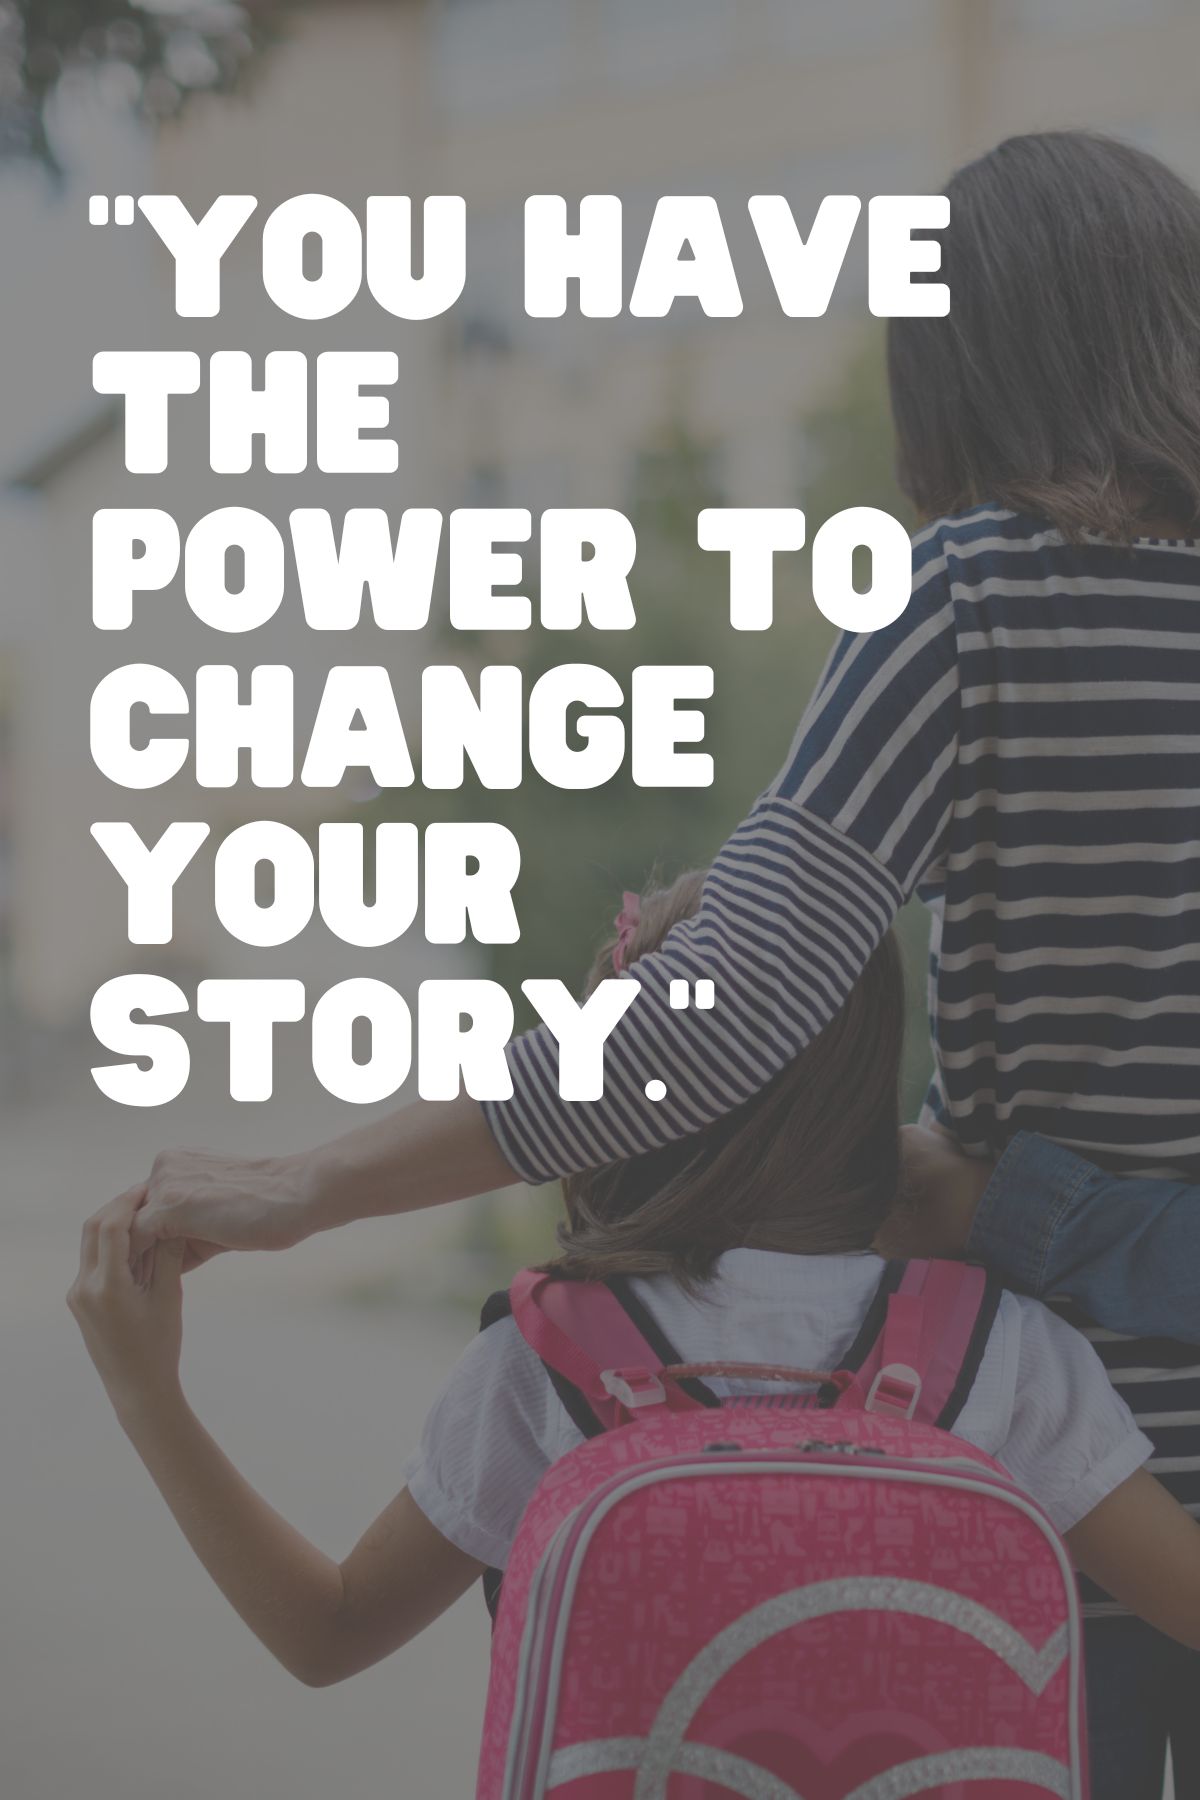 "You have the power to change your story." - Unknown